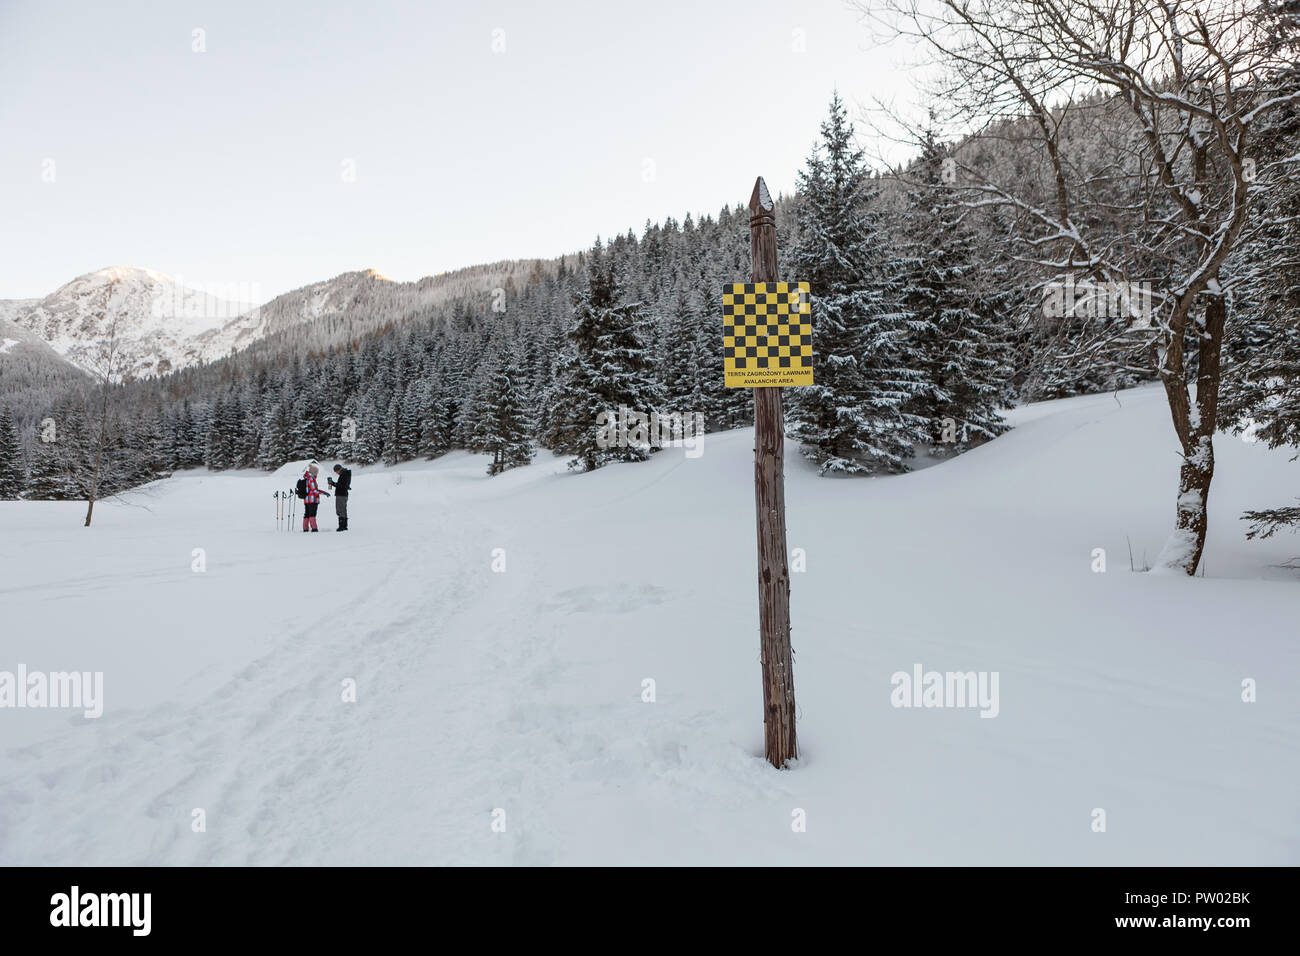 Avalanche area warning sign in english and polish language, valley in Tatra mountains, winter time Stock Photo